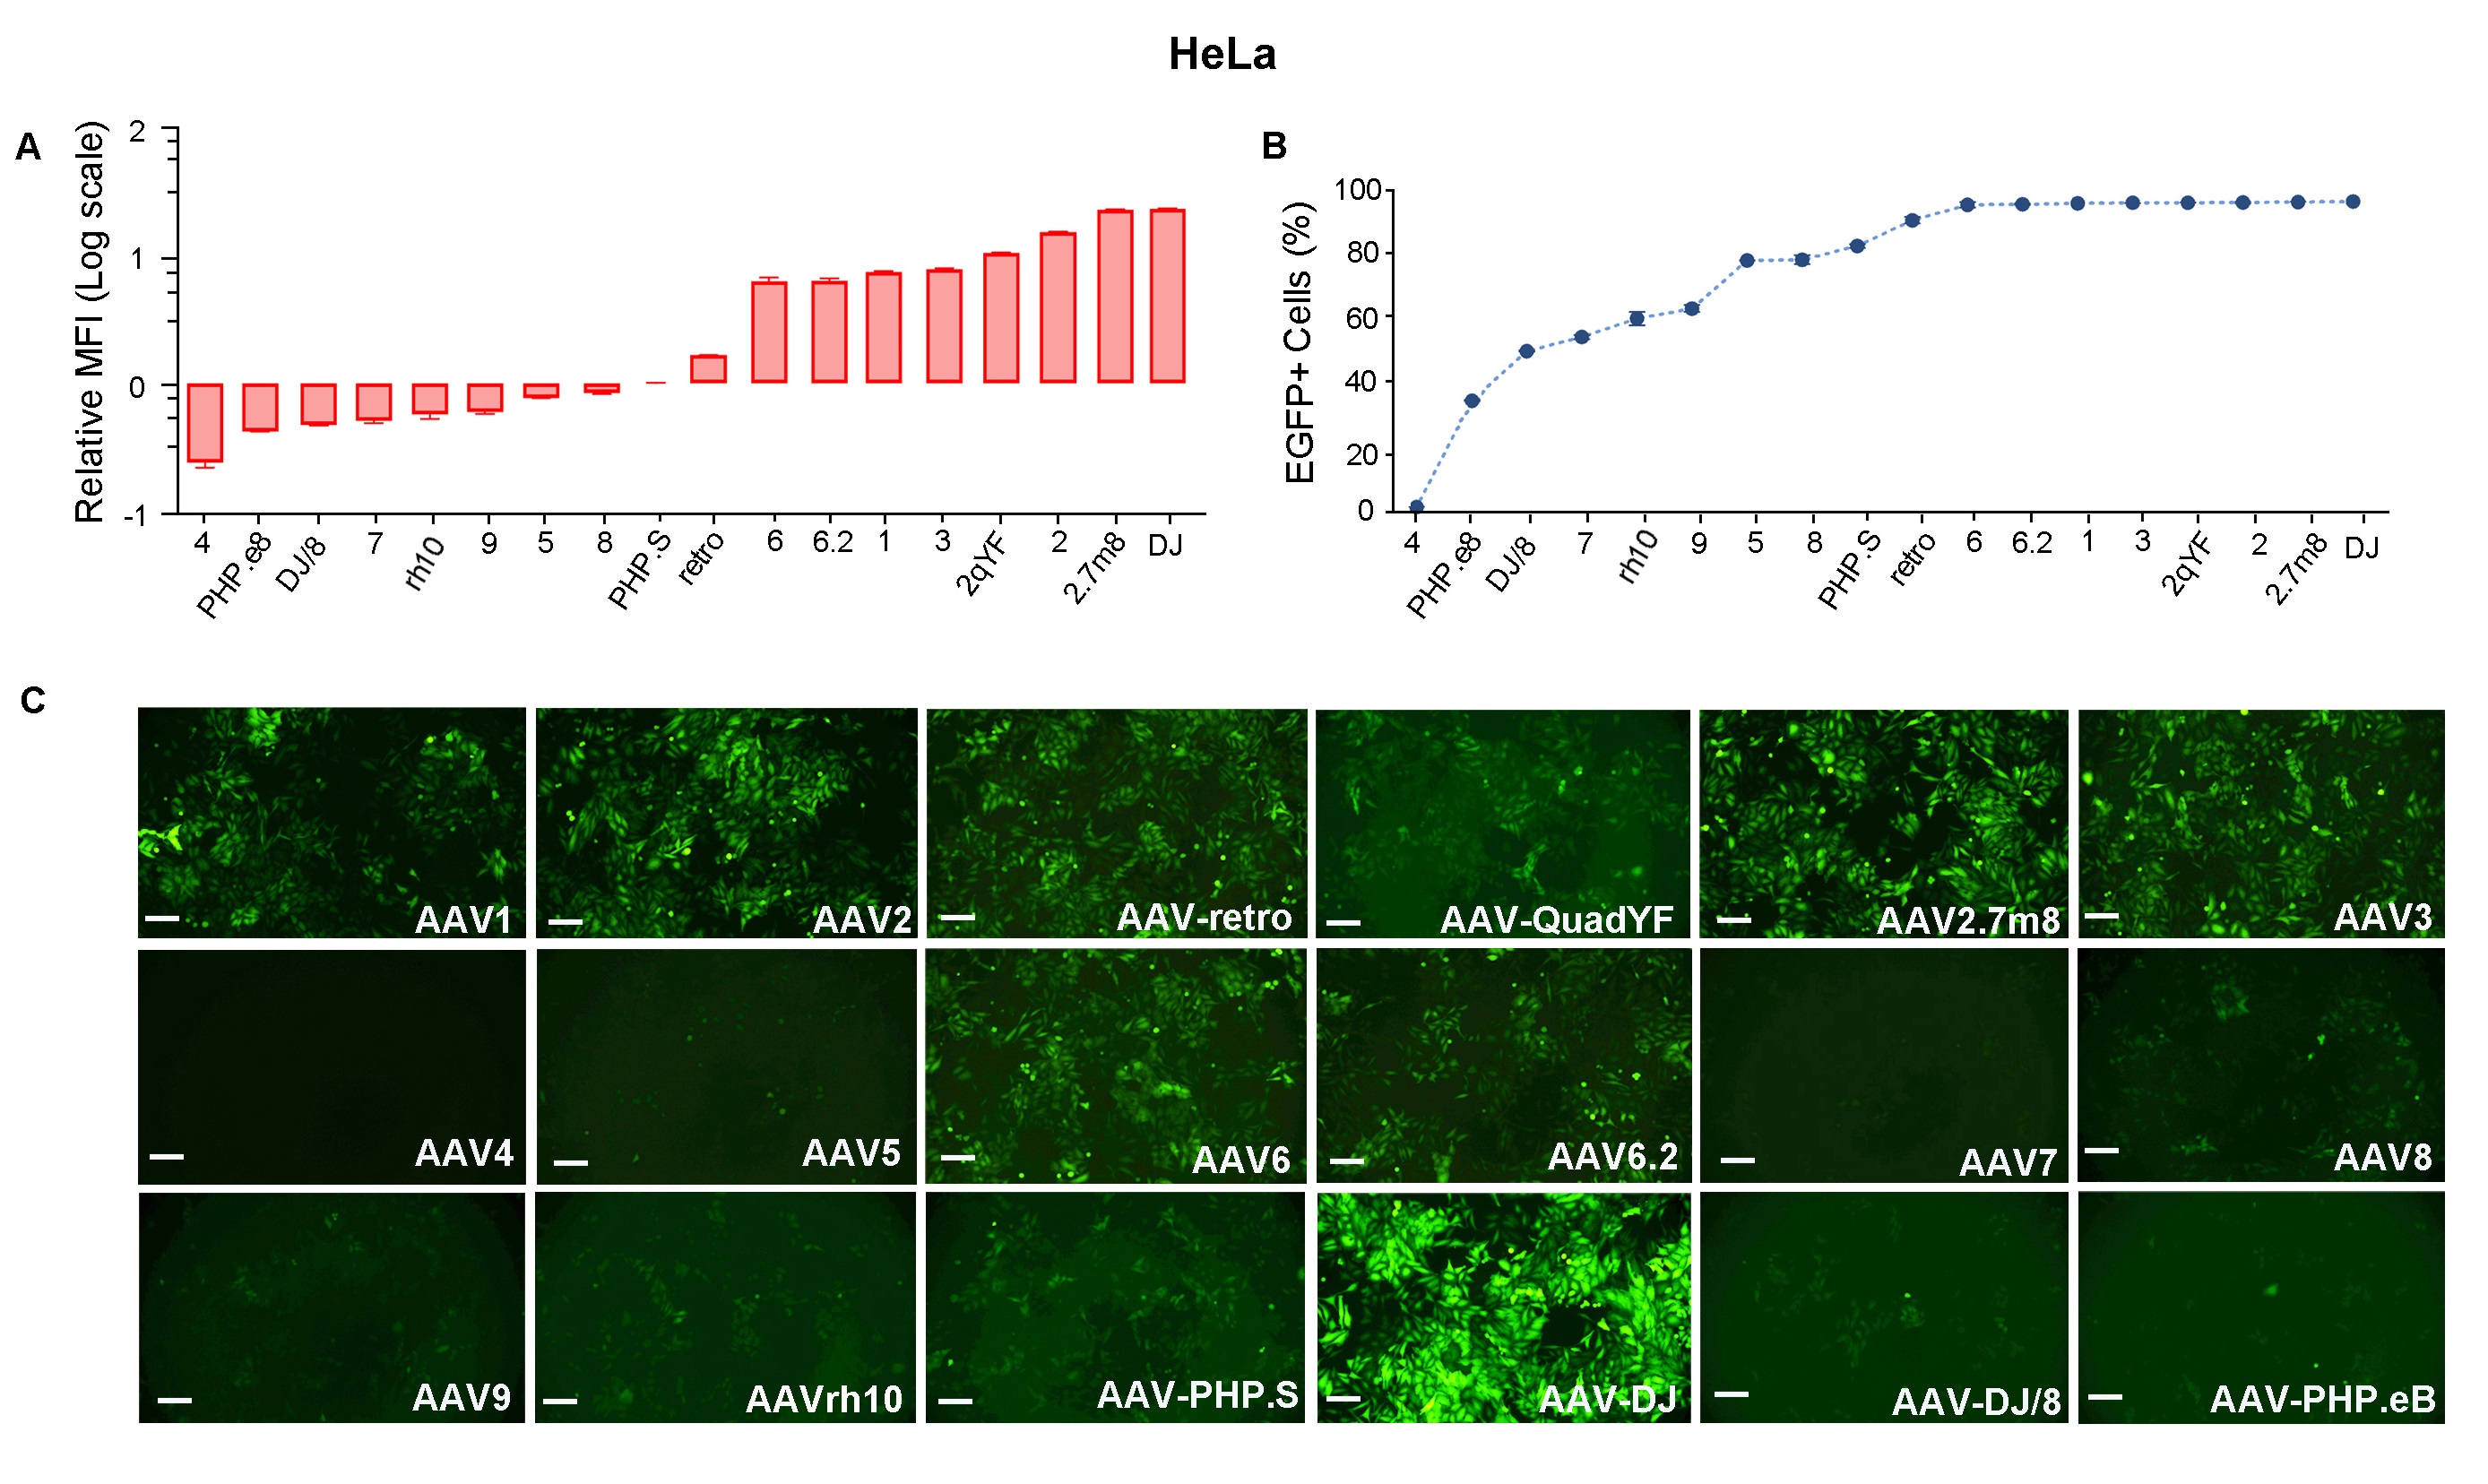 HeLa cells were transduced with 18 serotypes of recombinant AAVs and presented strong EGFP fluorescent signal.